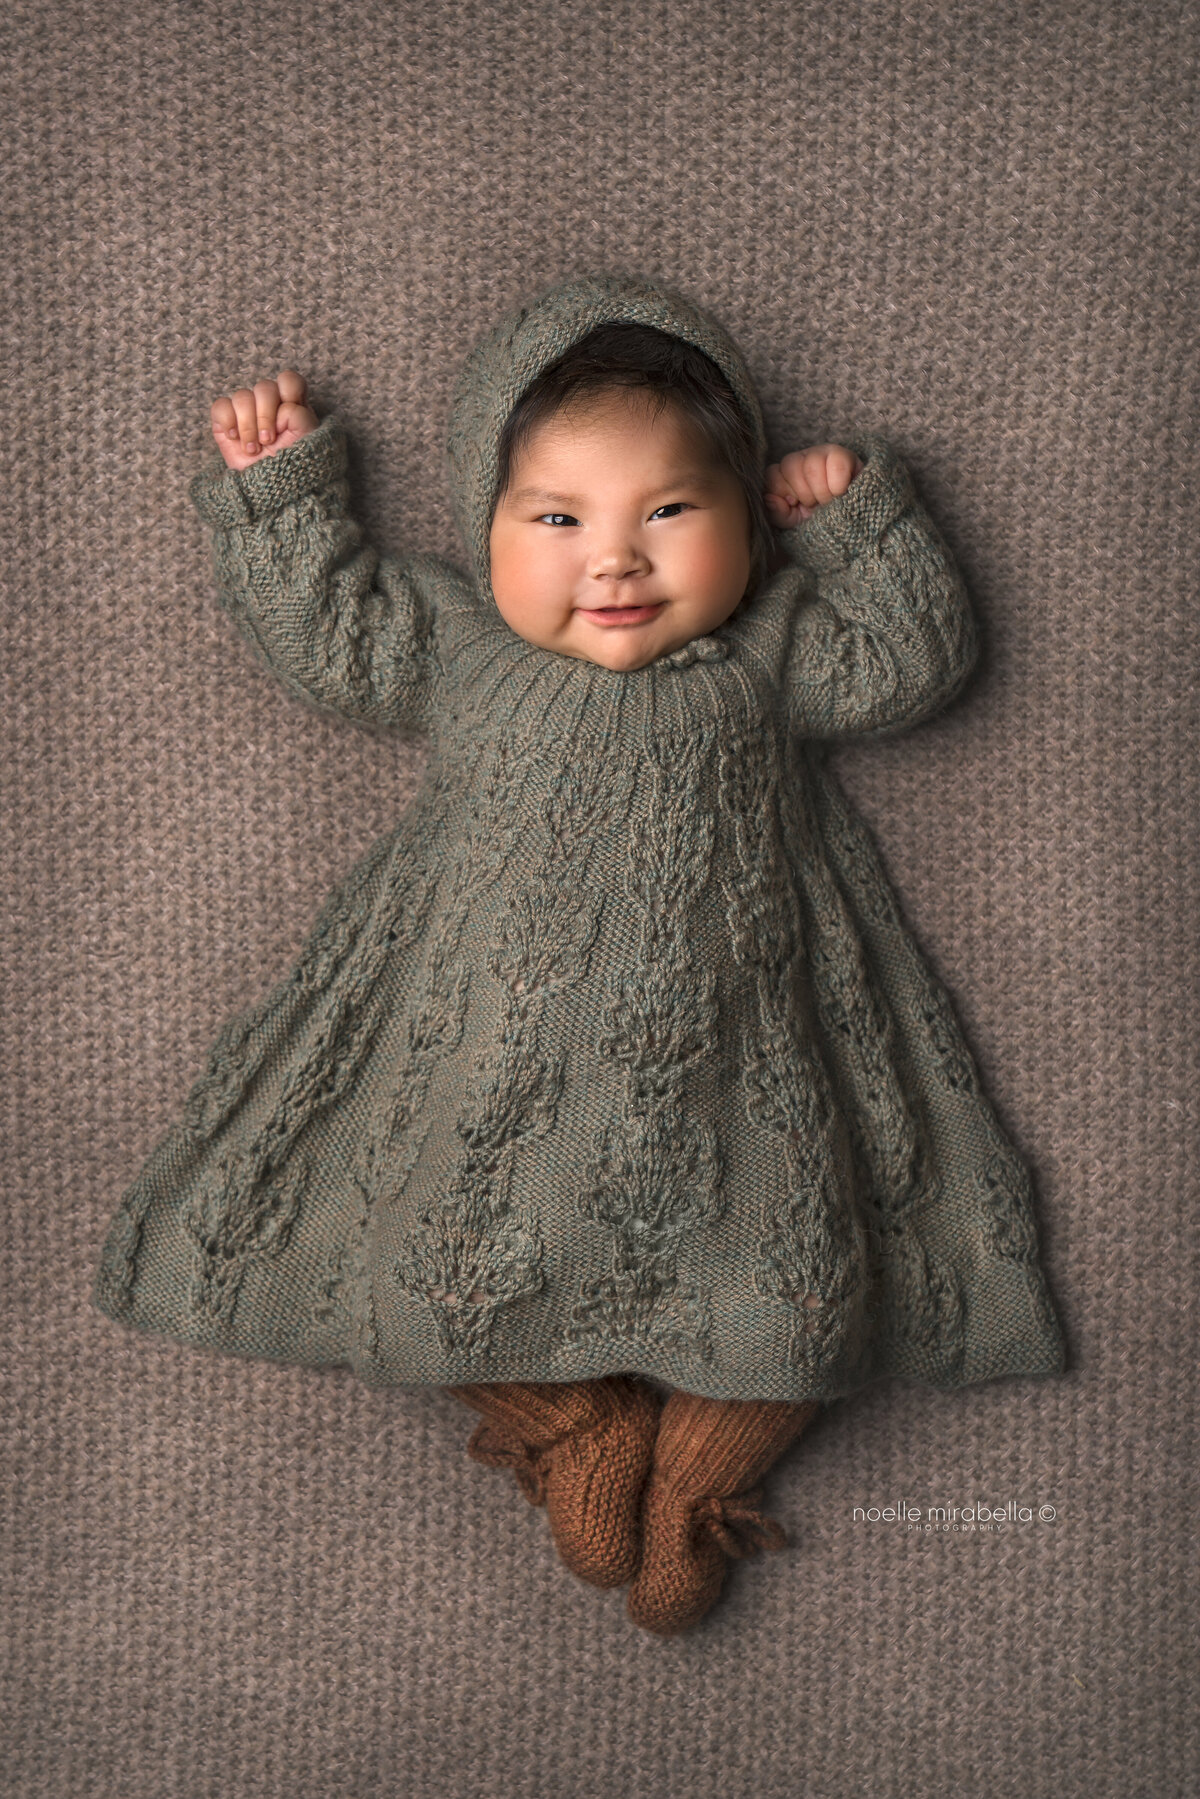 Baby in a sage knit dress and rust knit booties.